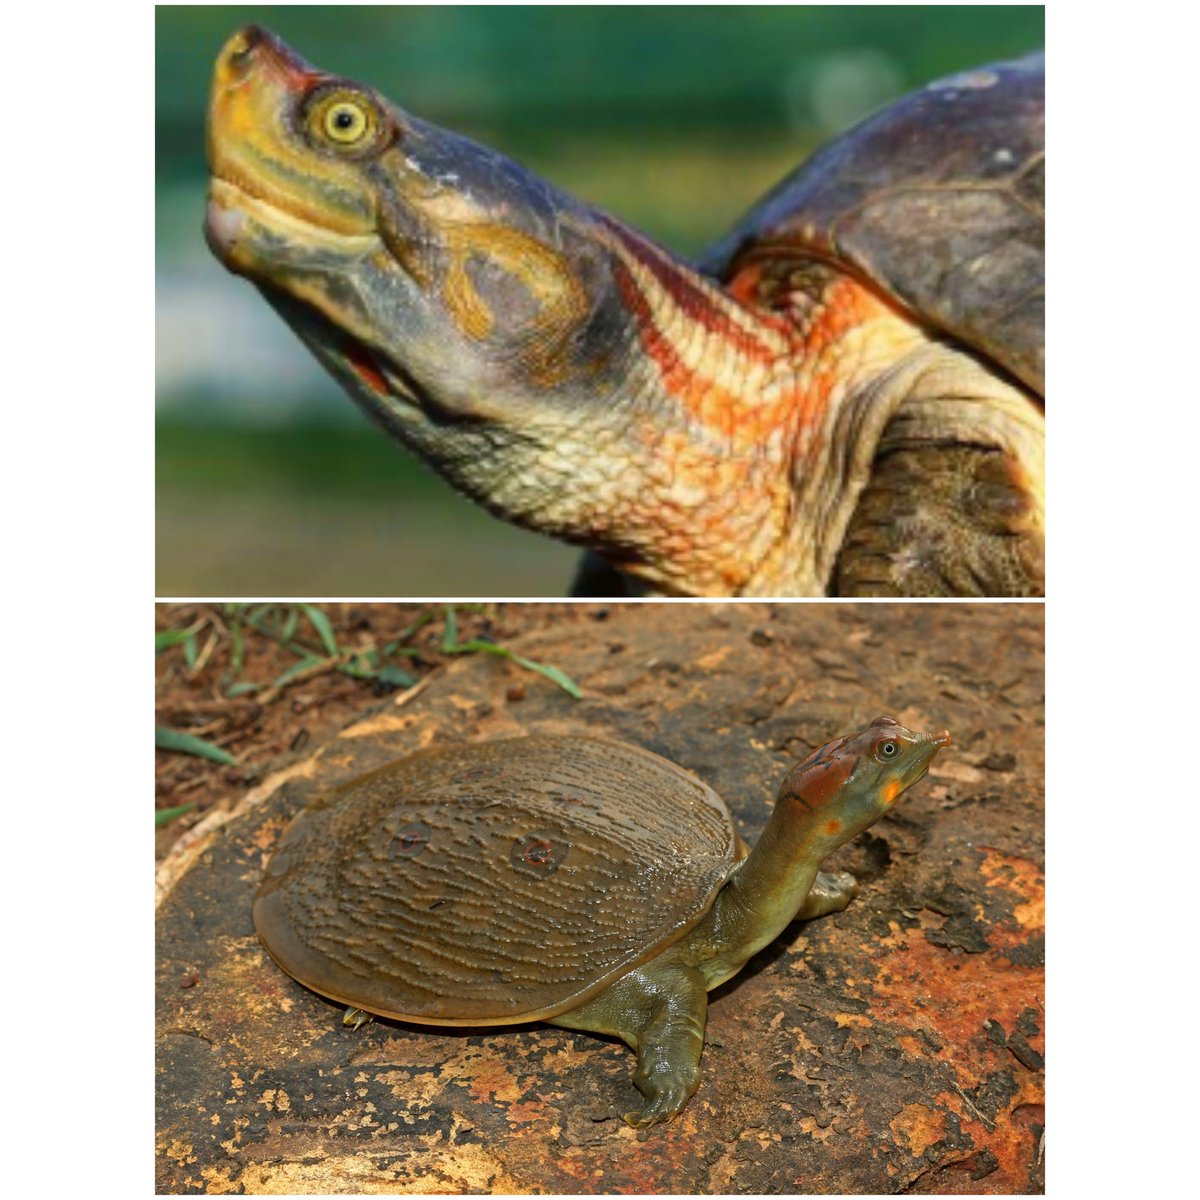 #Indian diplomacy wins the day as Red-Crowned Roofed #Turtle & Leith’s soft-shell turtle moved to CITES Appendix I. Their population was decreasing as a result of habitat loss (sand mining, agricultural activities on sandbars). Cheers to India leading the path to #conservation!